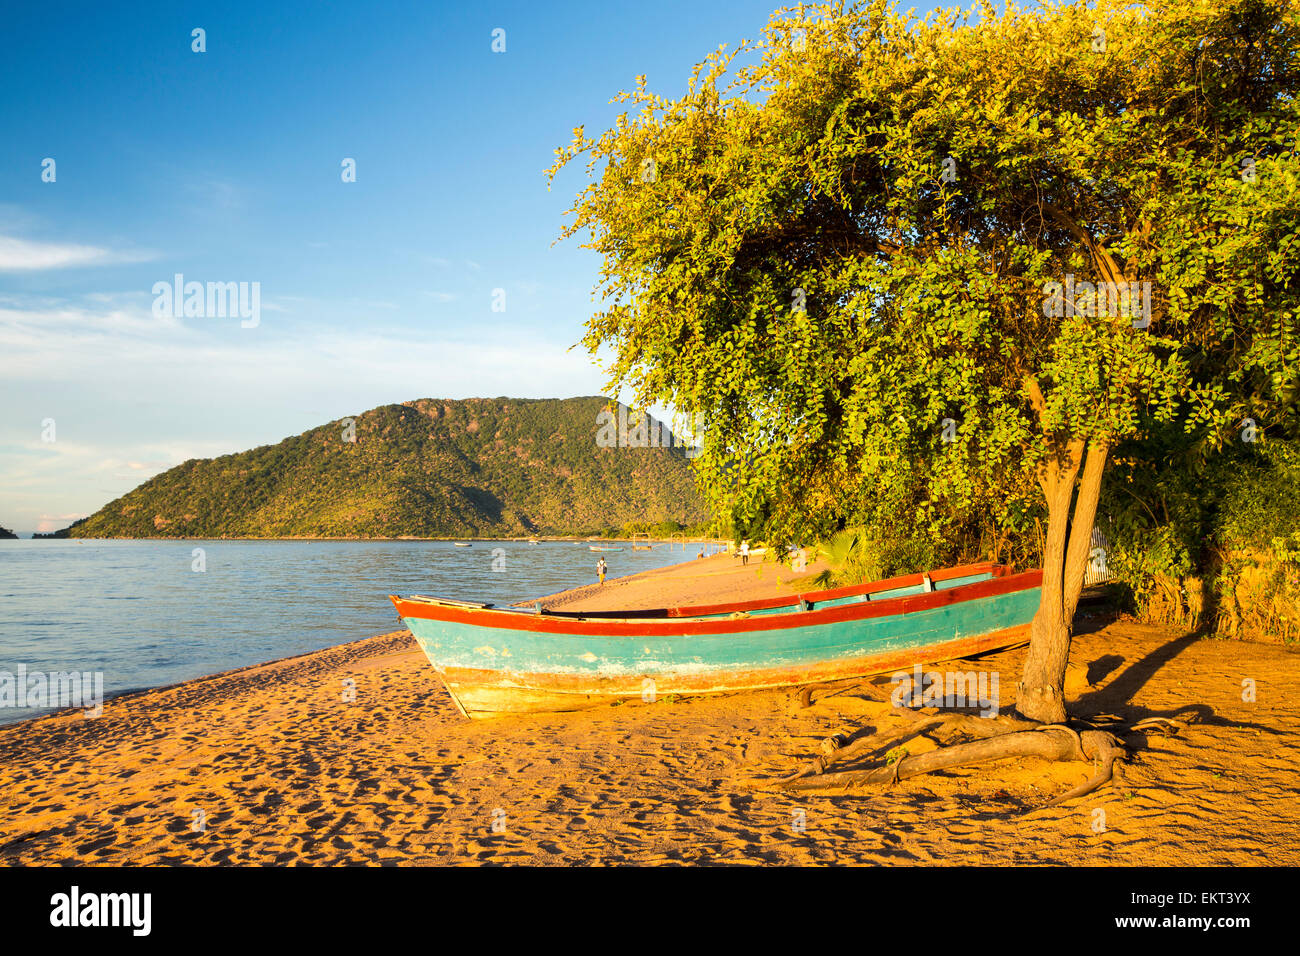 A boat on the beach at Cape Maclear on the shores of Lake Malawi, Malawi, Africa. Stock Photo